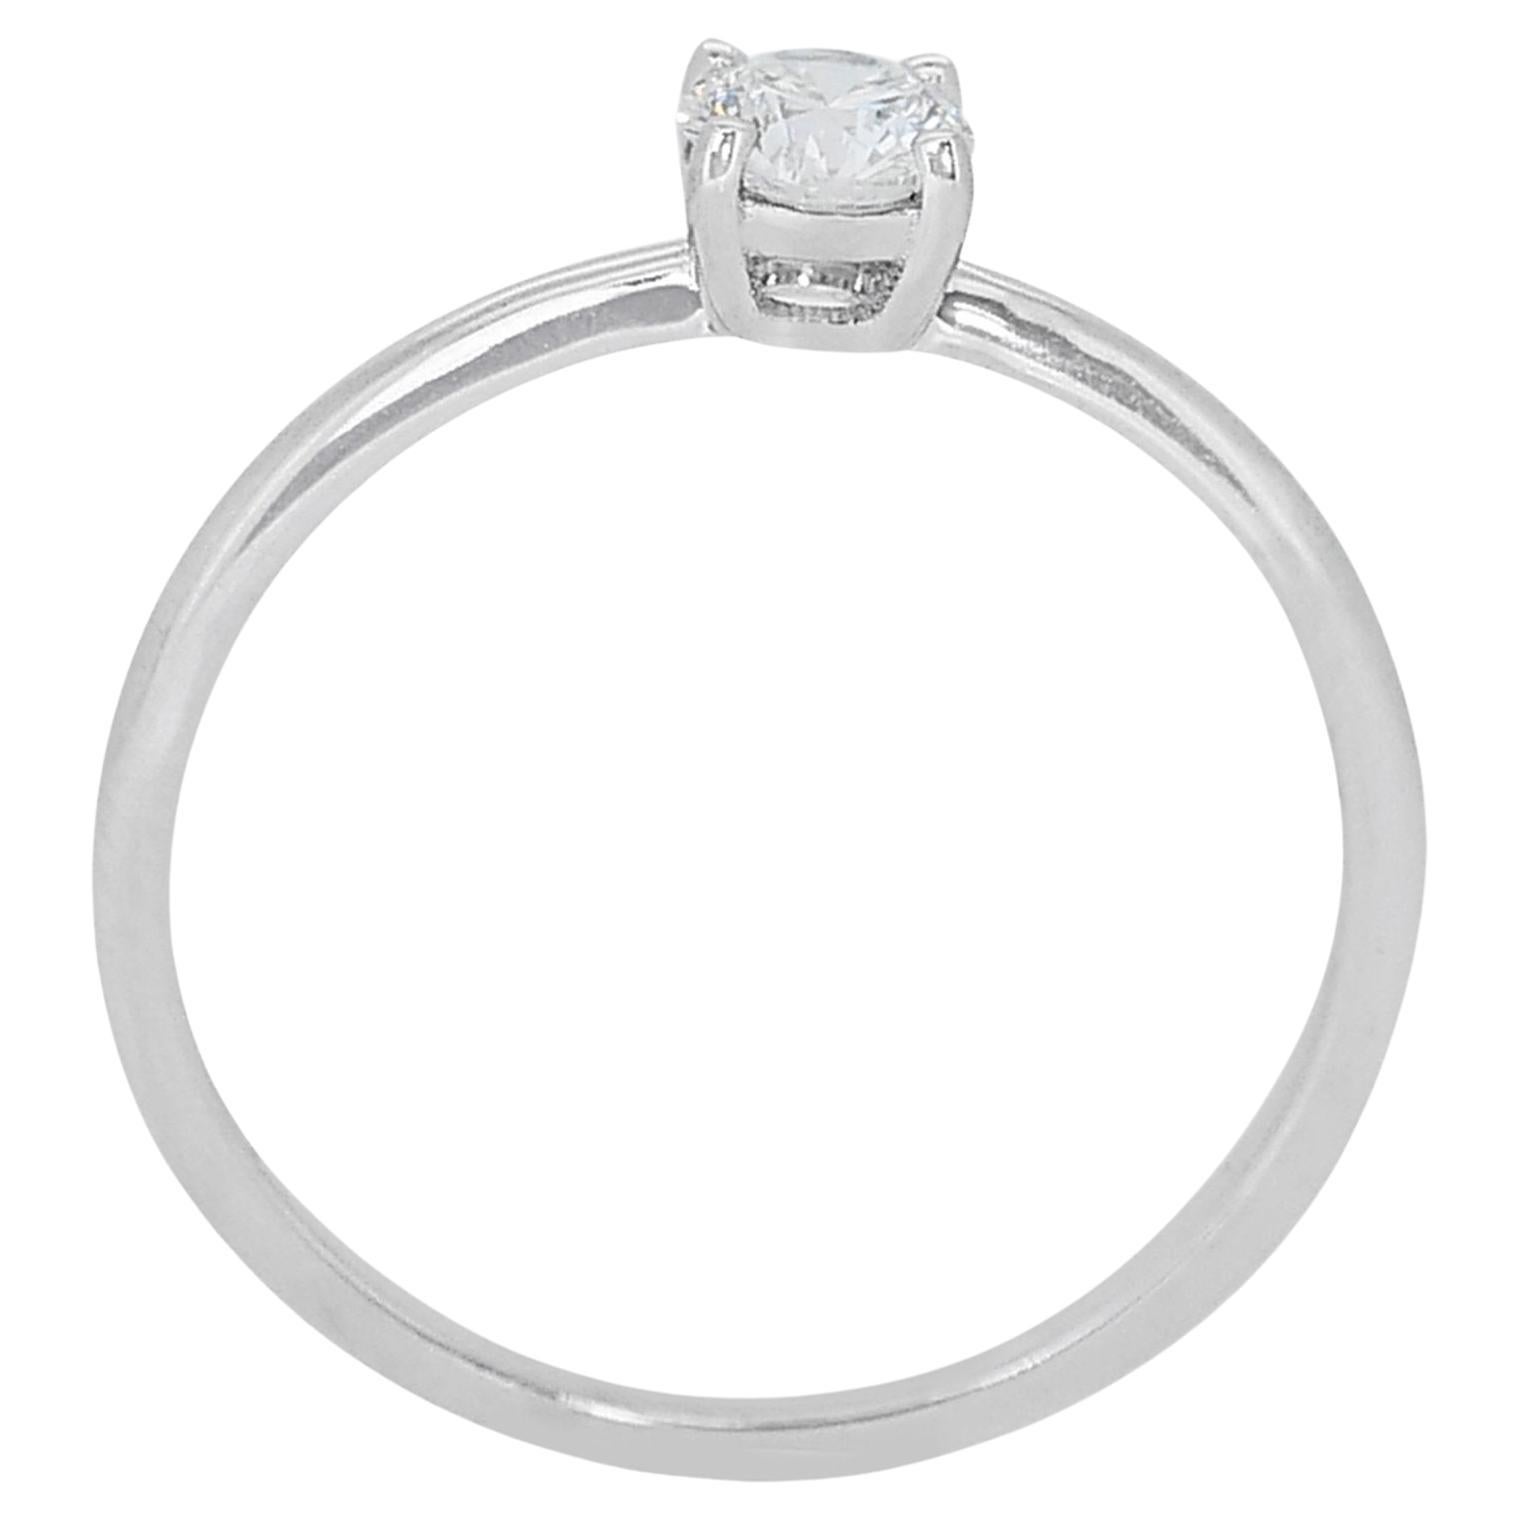 Classic 0.70ct Diamond Solitaire Ring in 18k White Gold - GIA Certified For Sale 1